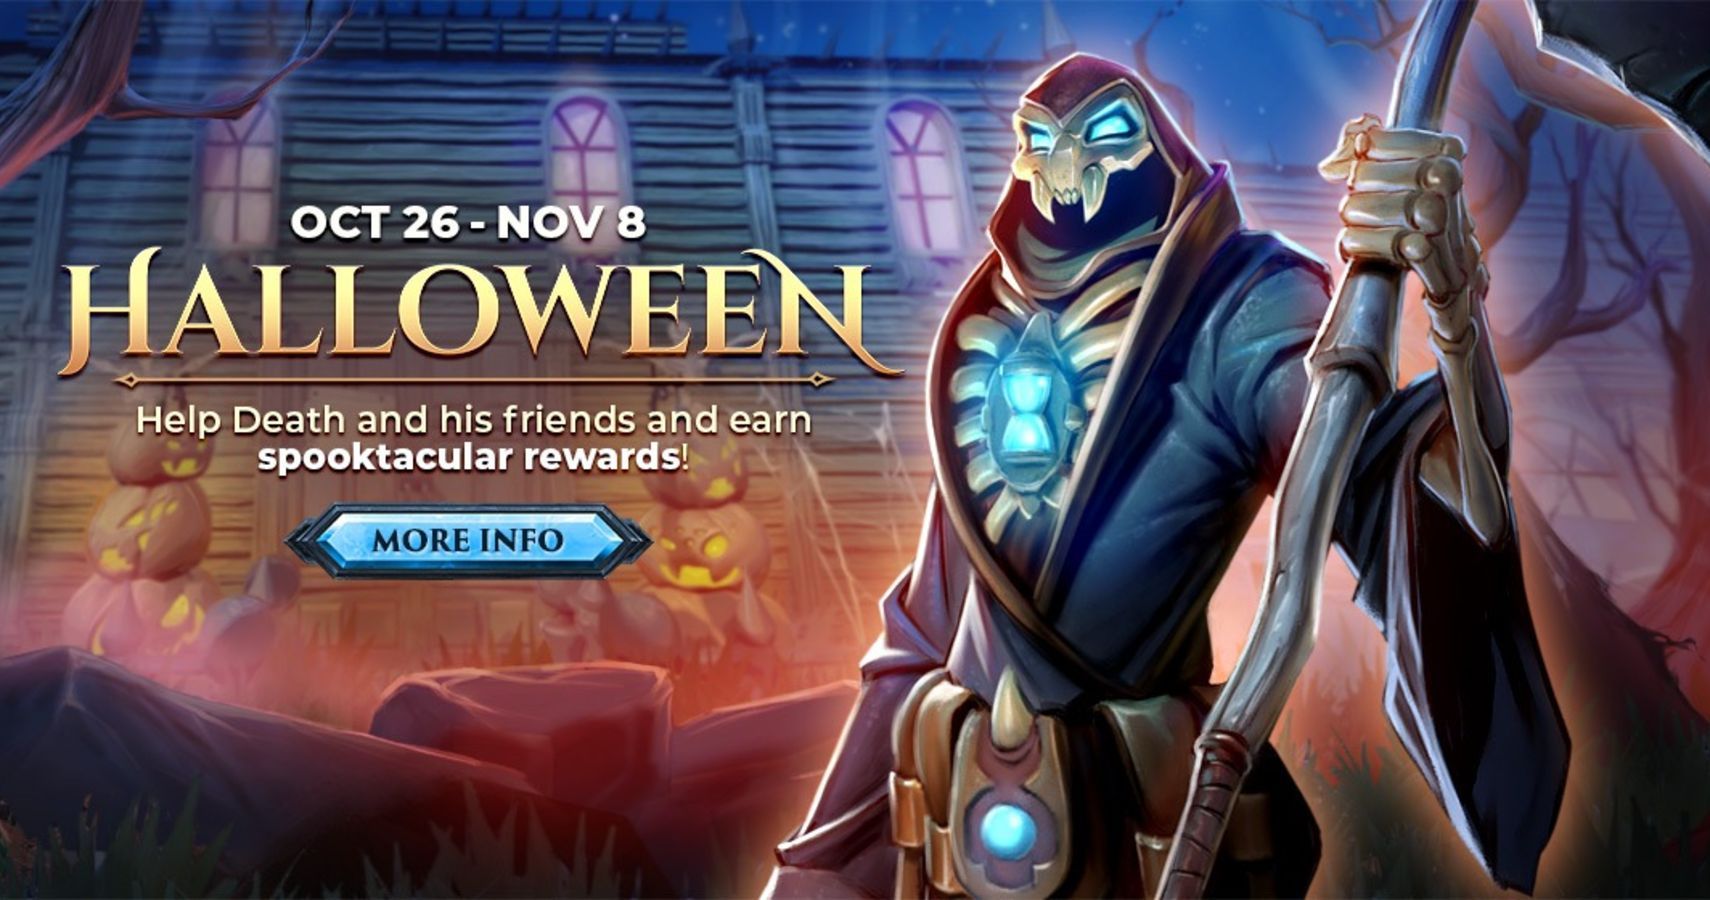 RuneScape's Halloween Event Sees You Helping Death, Famine, And Pestilence